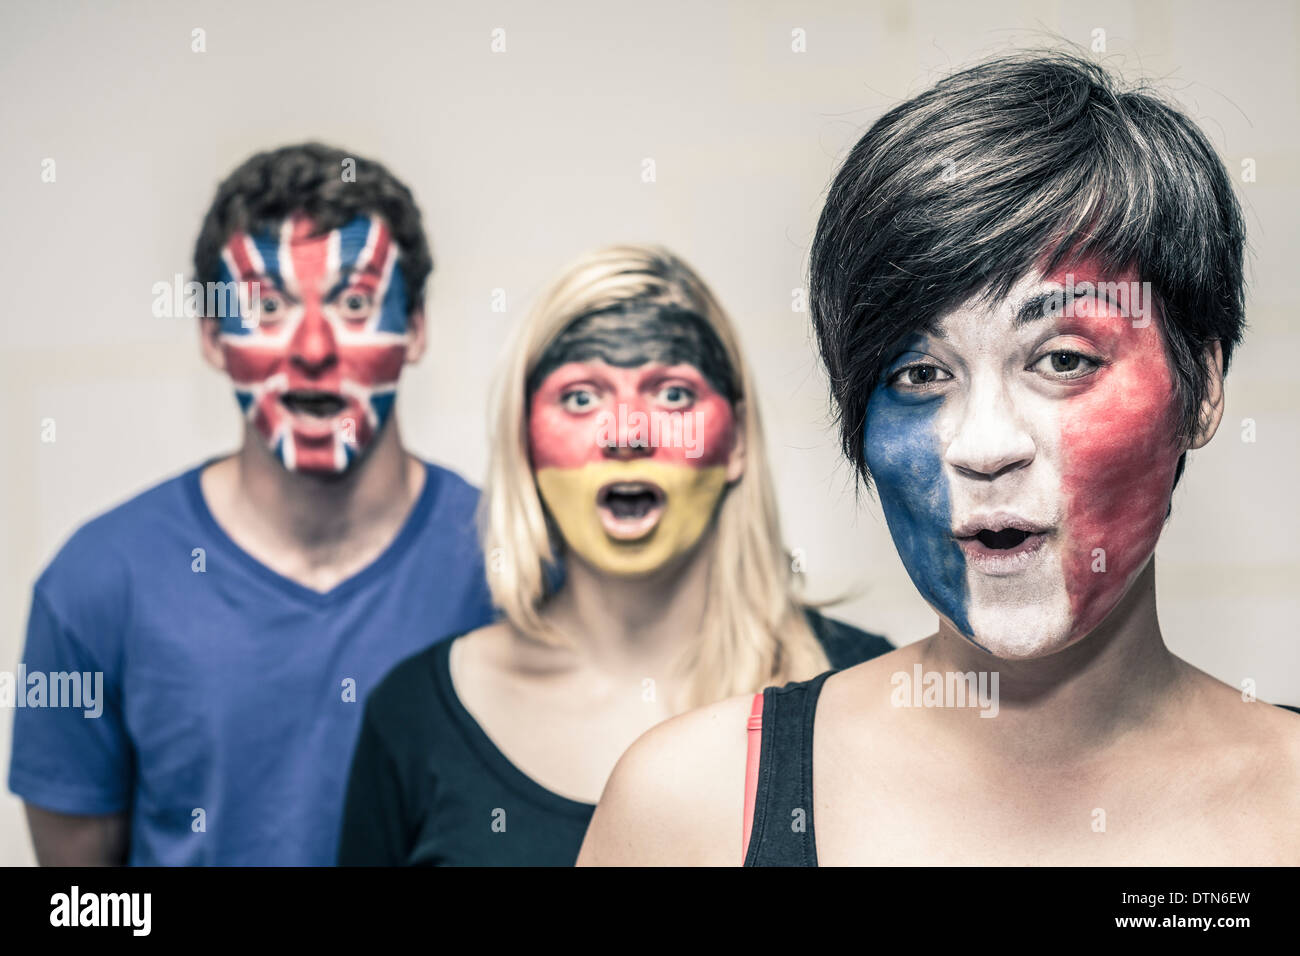 Group of surprised happy people with painted flags on their faces. Stock Photo